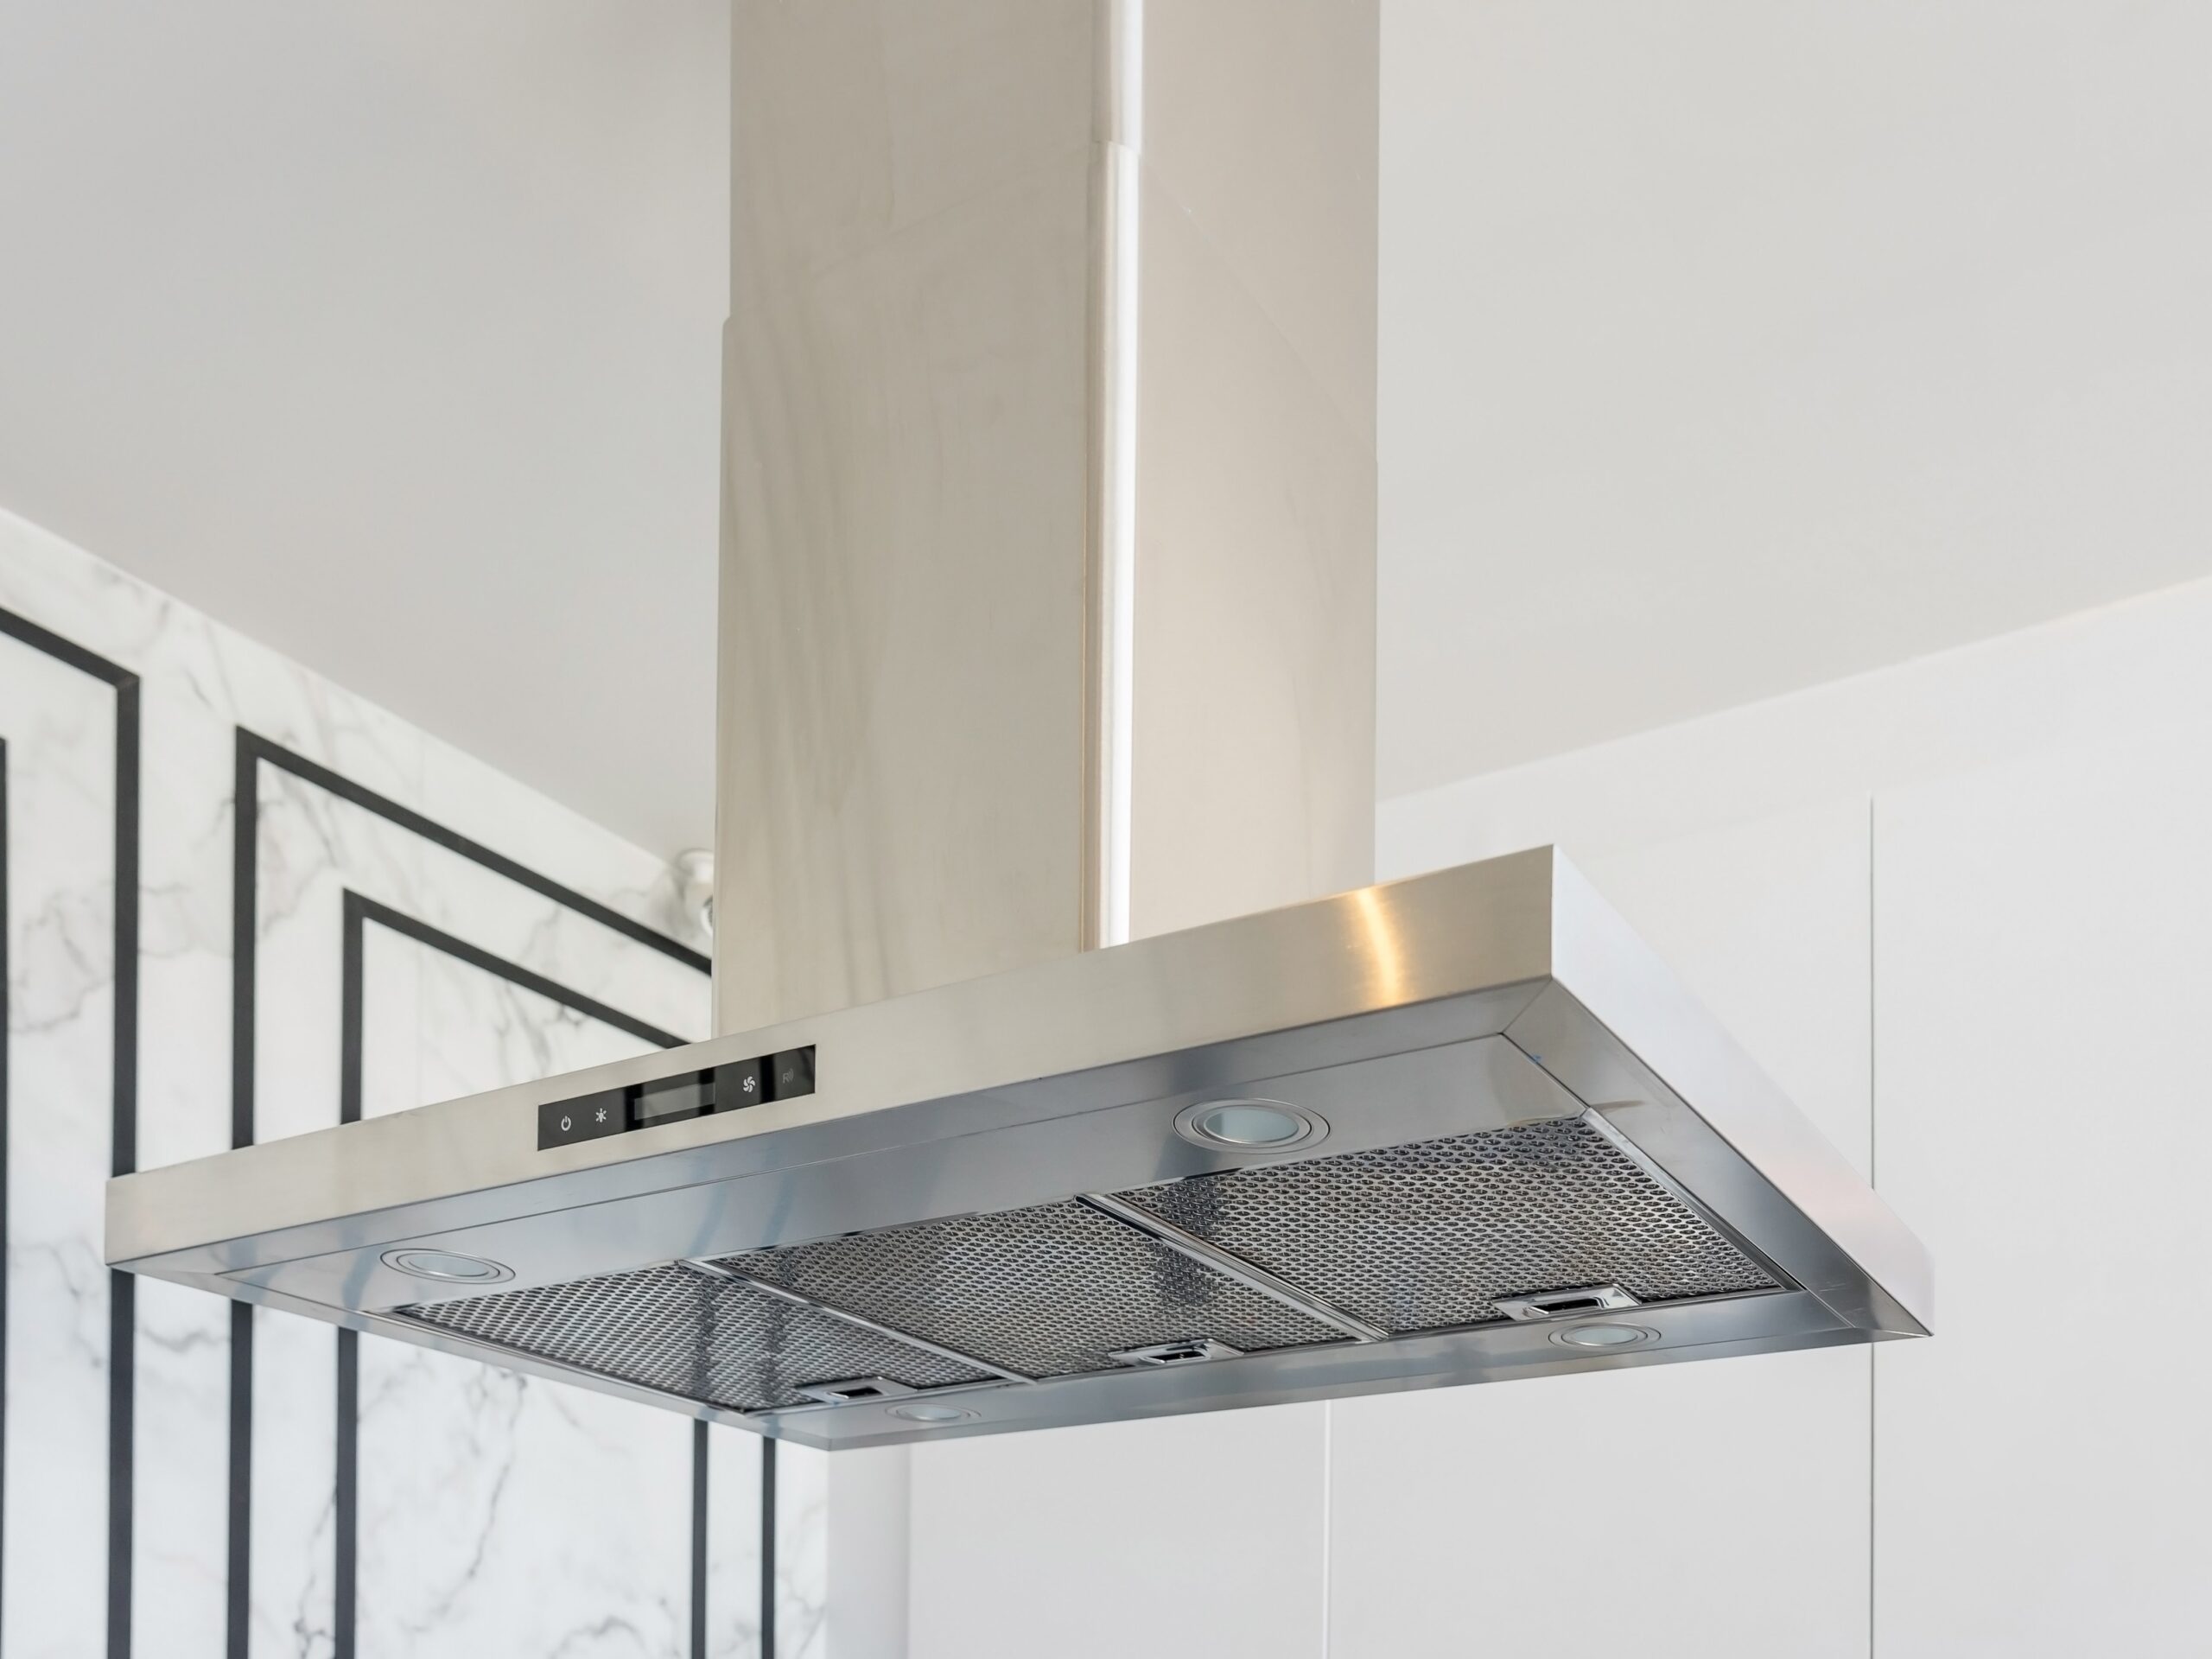 Modern stainless steel And Range hood in the kitchen interior. Stainless Steel Cooker Hood with light on. Kitchen Appliances